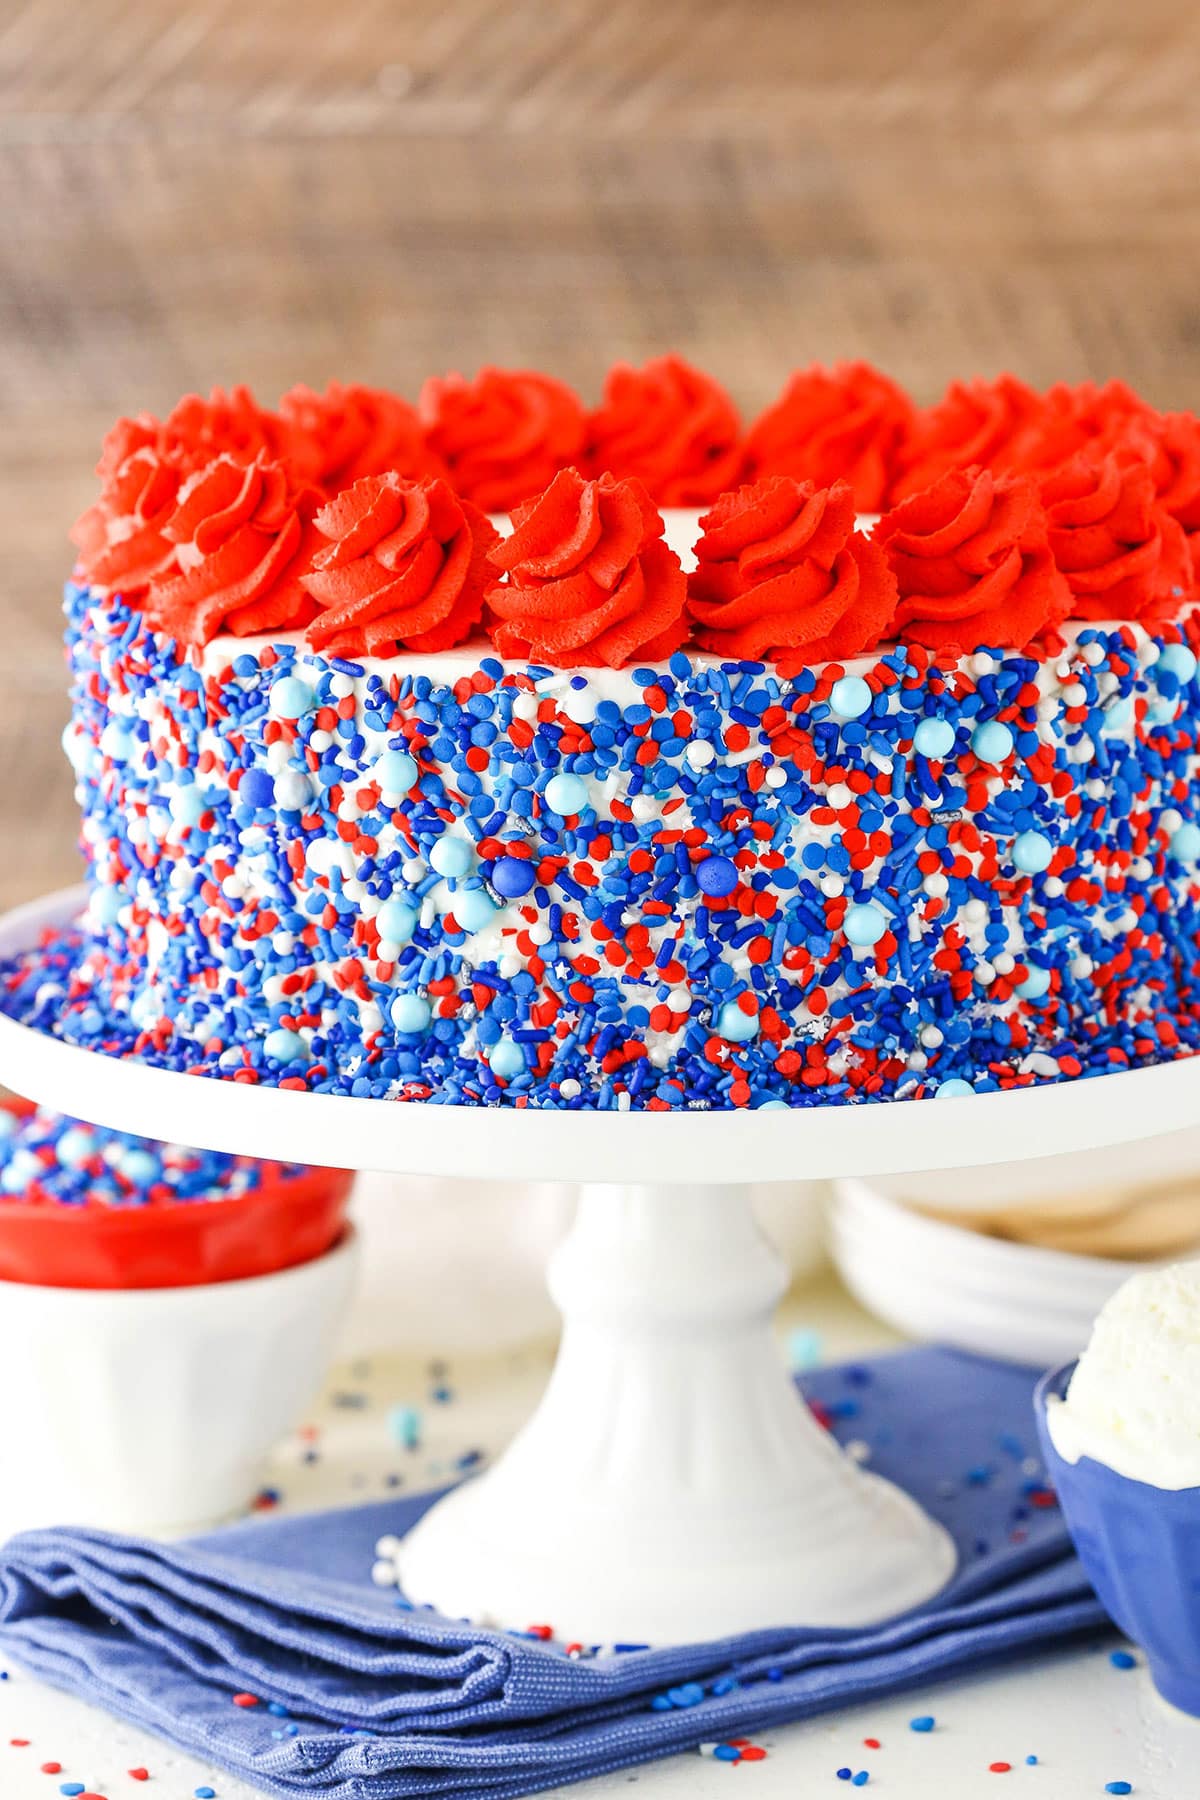 Red white and blue ice cream cake with sprinkles.